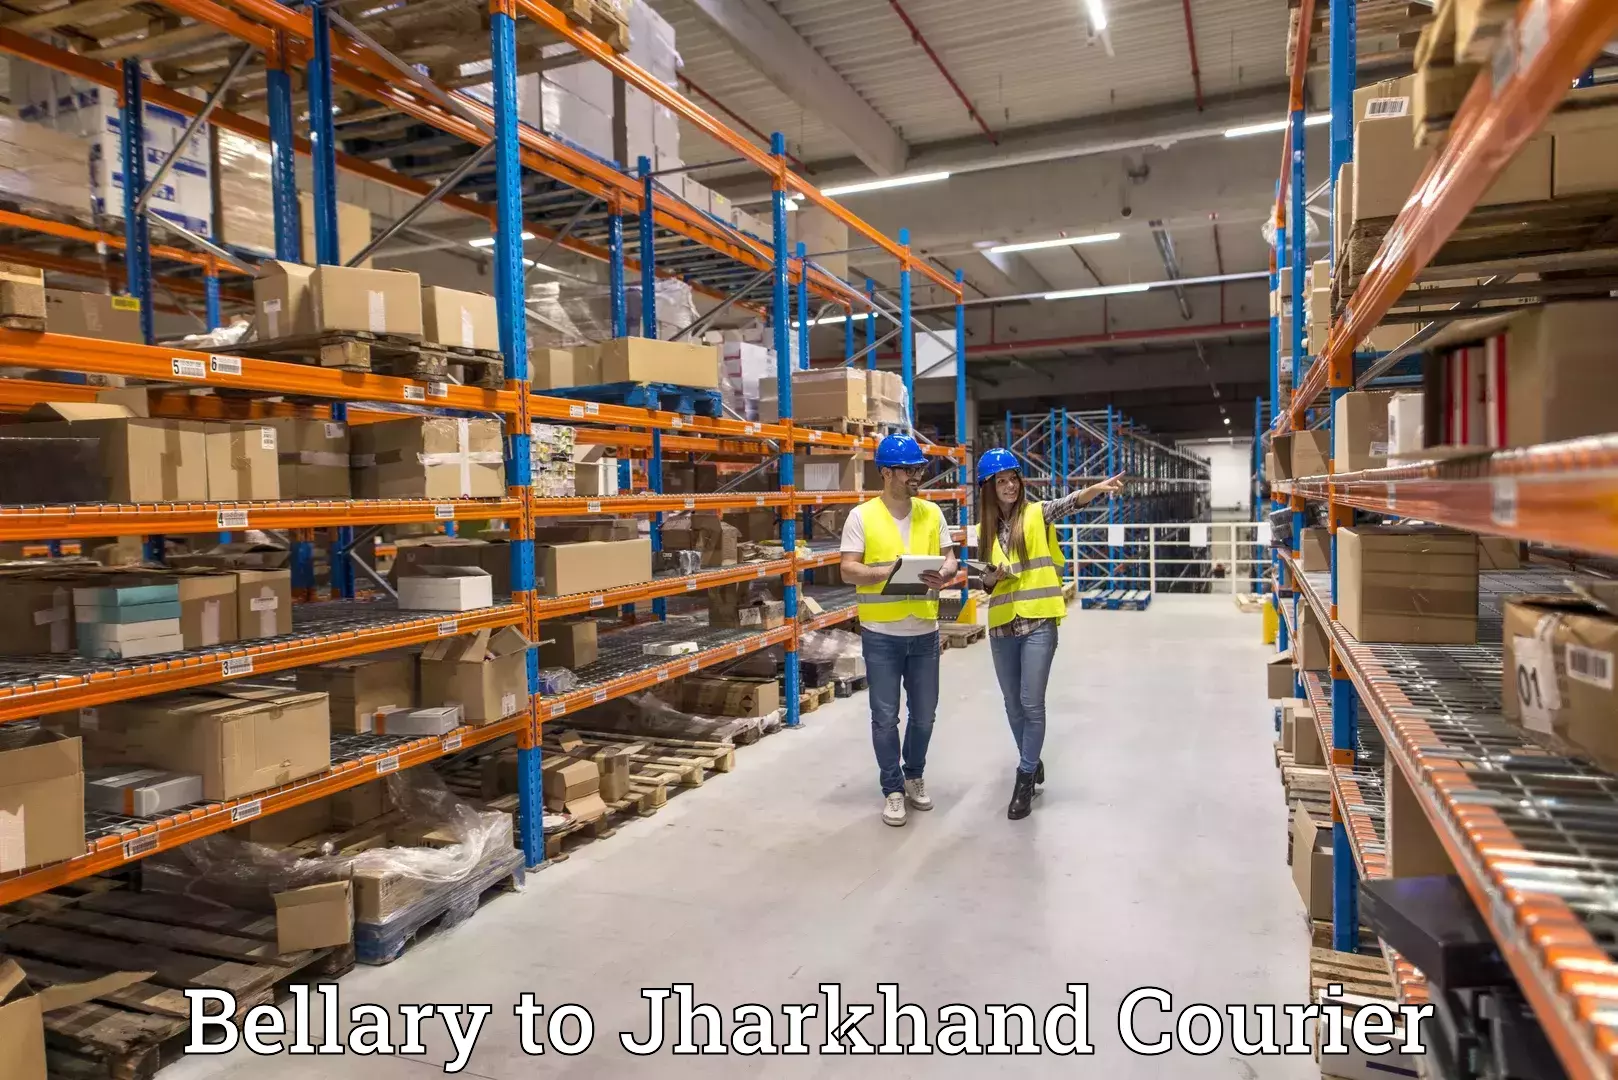 Courier service partnerships Bellary to Jharkhand